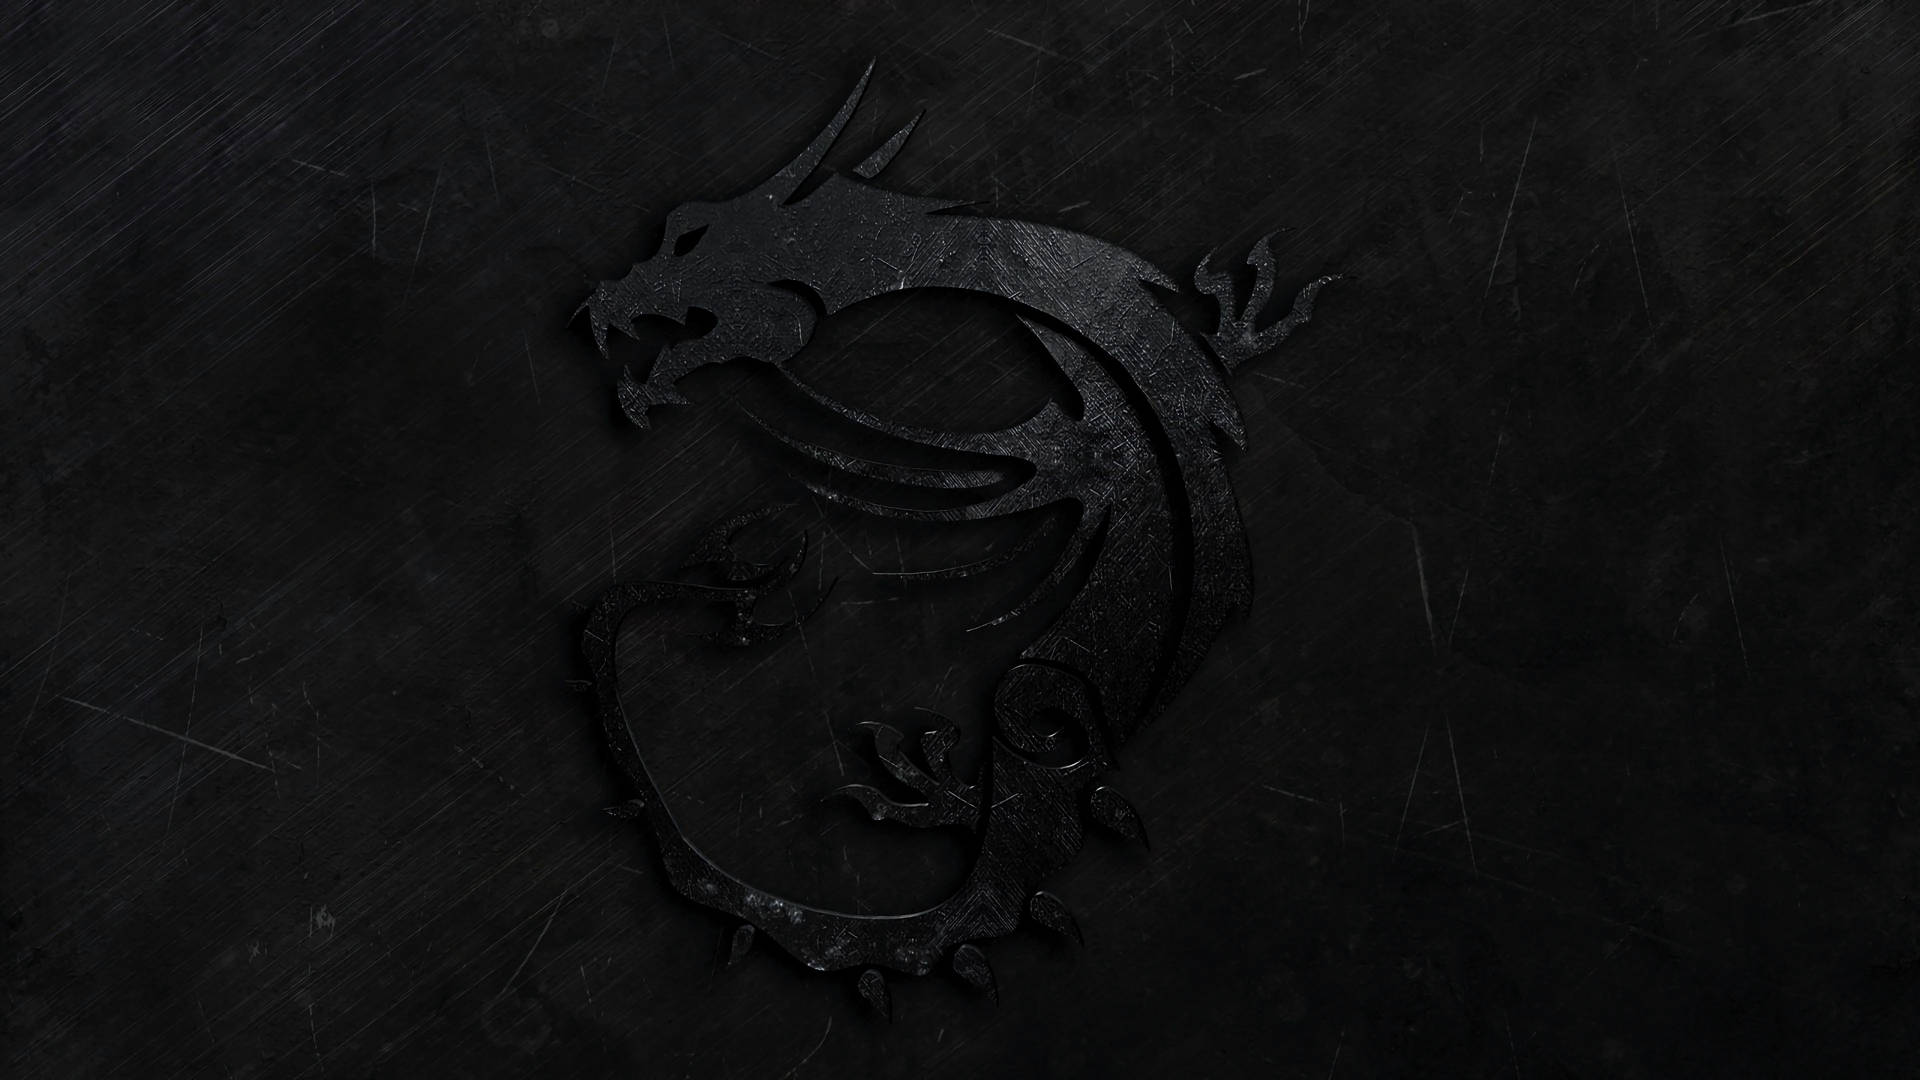 Download A Black Dragon With Flames On It Wallpaper | Wallpapers.com